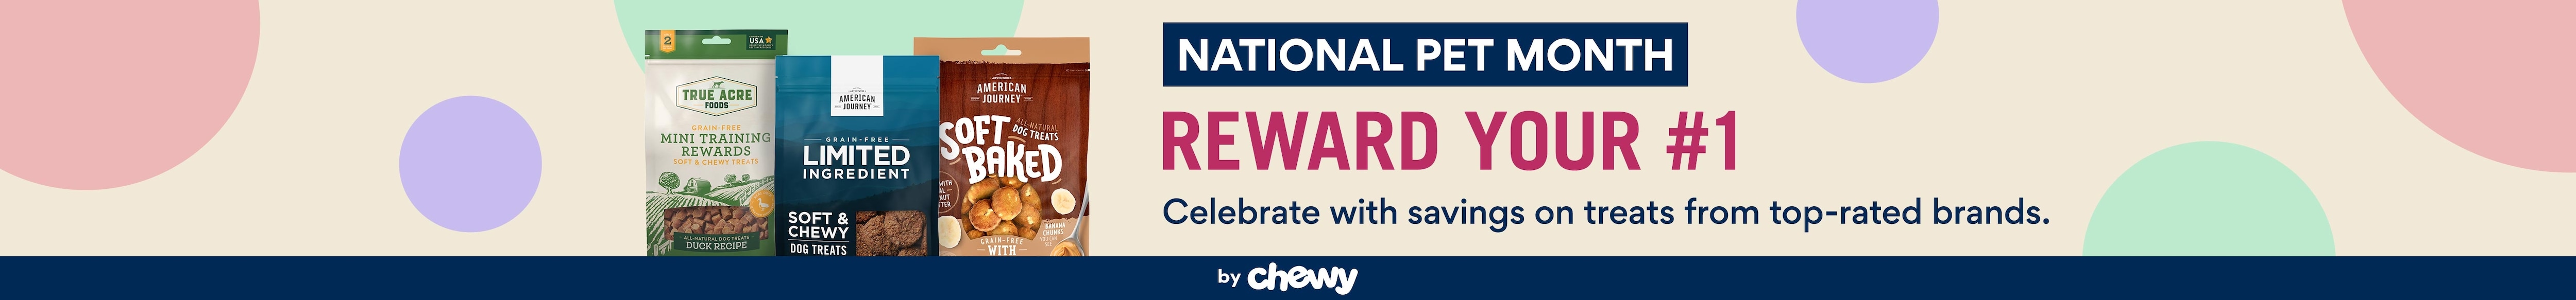 National Pet Month. Reward Your #1. Celebrate with savings on treats from top-rated brands by Chewy.